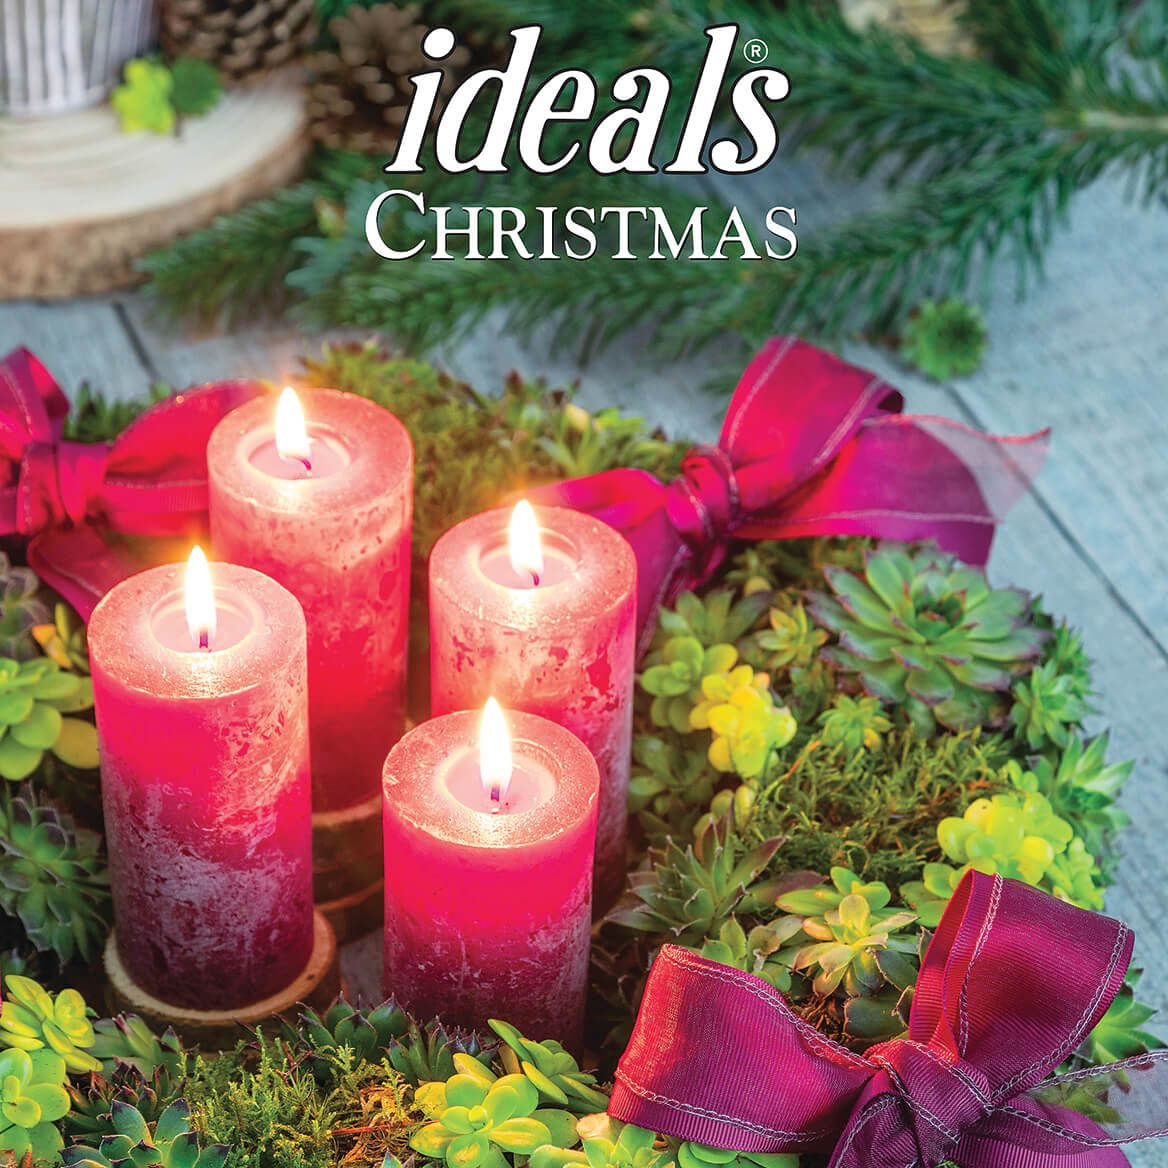 Ideals Christmas Issue + '-' + 309992